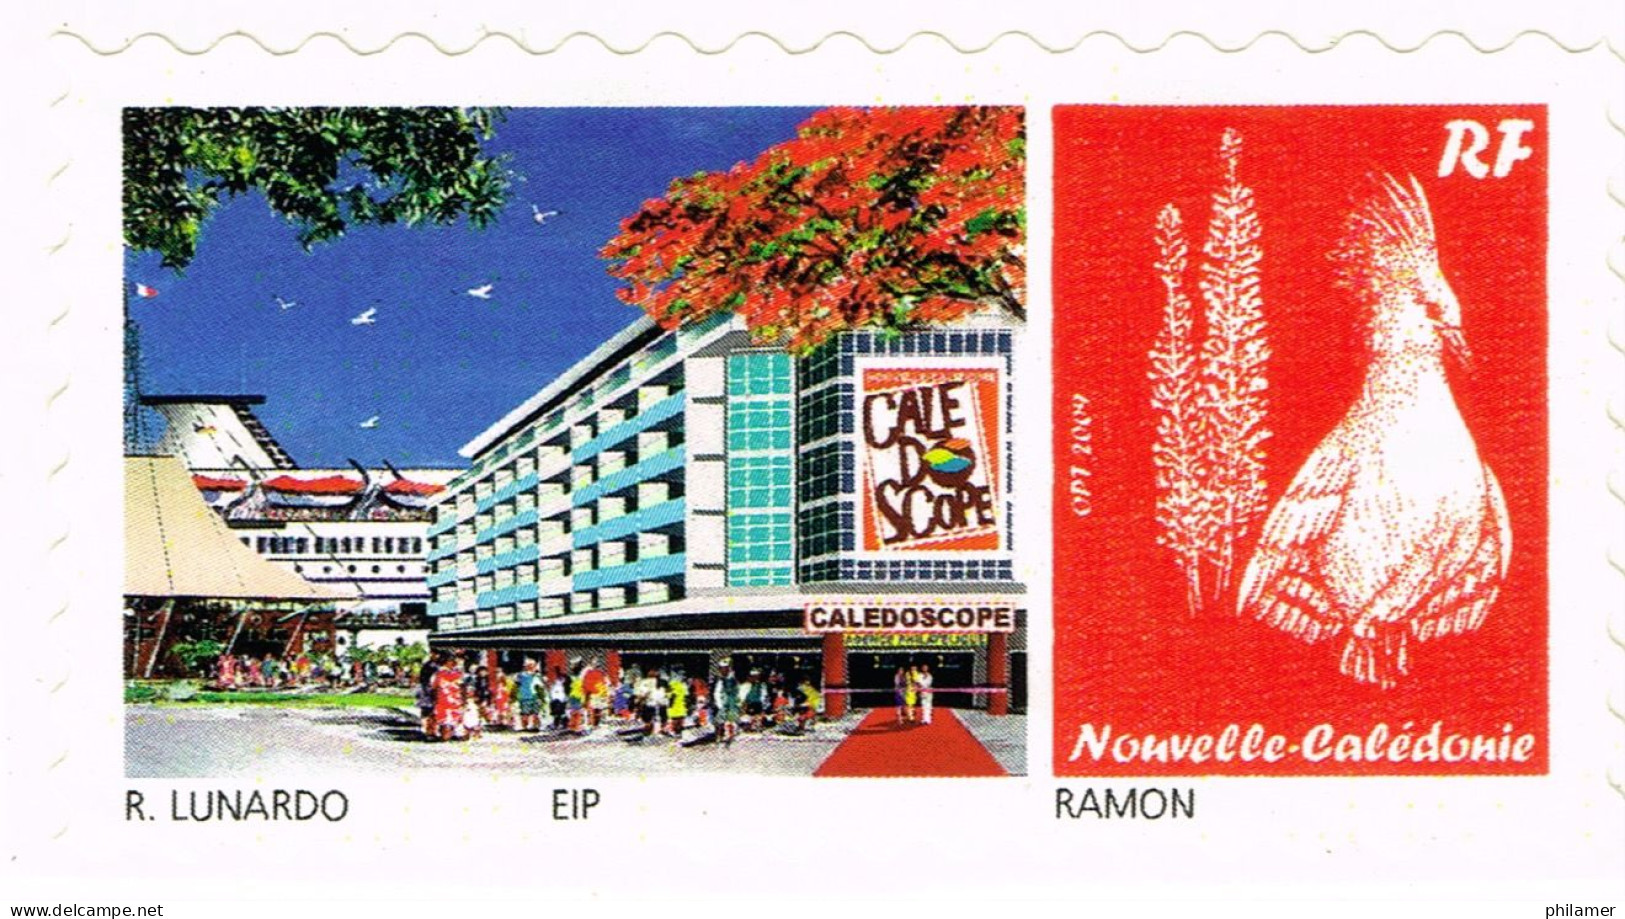 NOUVELLE CALEDONIE NEW CALEDONIA Timbre A Moi Personnalis Public YT 1187 TPNC21 Caledoscope 2012 Ramon Neuf B - Unused Stamps